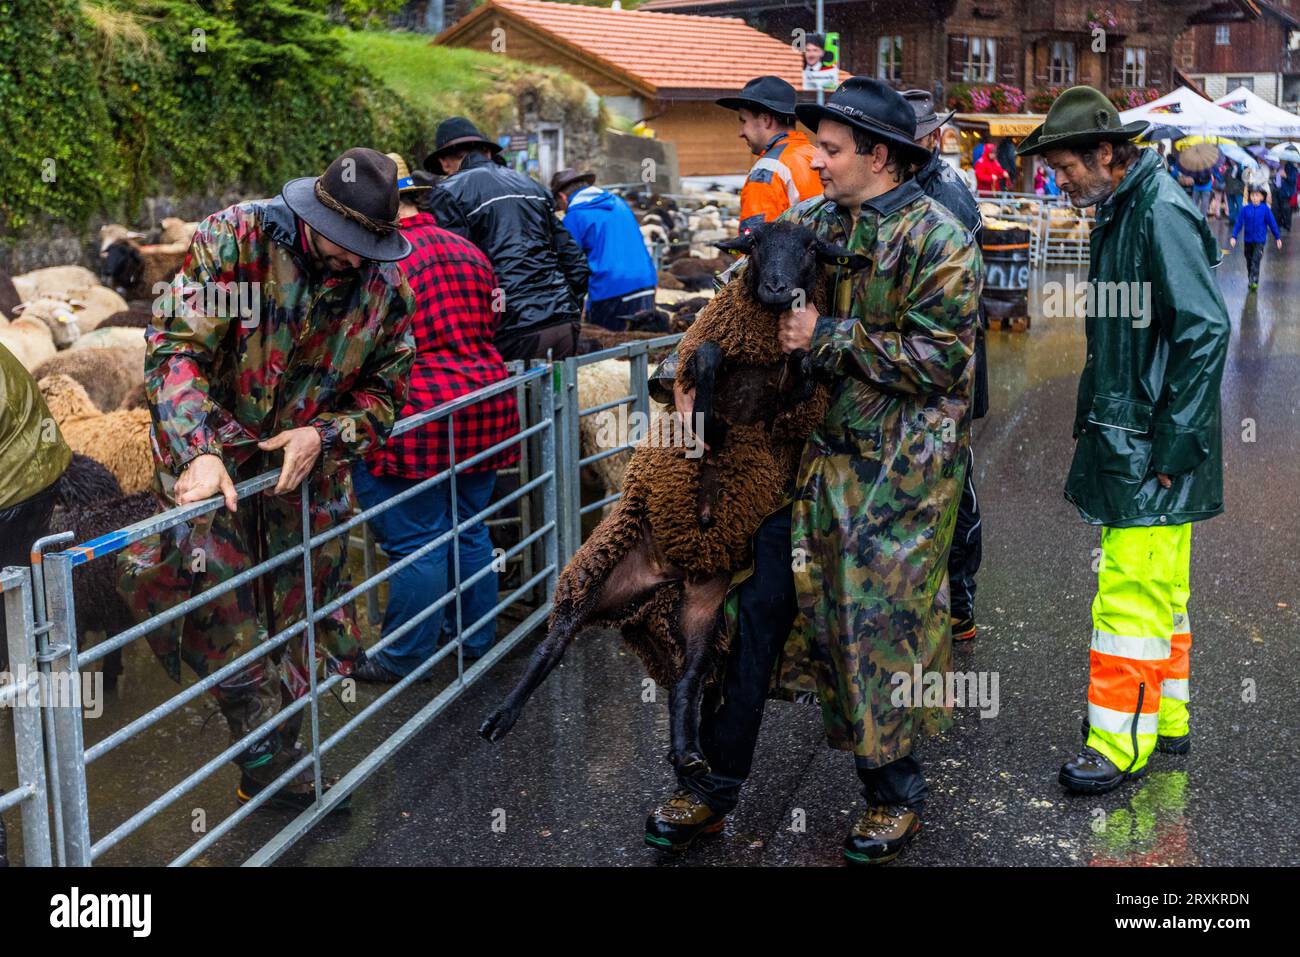 Schafscheid is the celebration after the departure of the sheep from the summer stay on the mountain pasture. It is celebrated every year on a Monday in September in Jaun, Switzerland Stock Photo